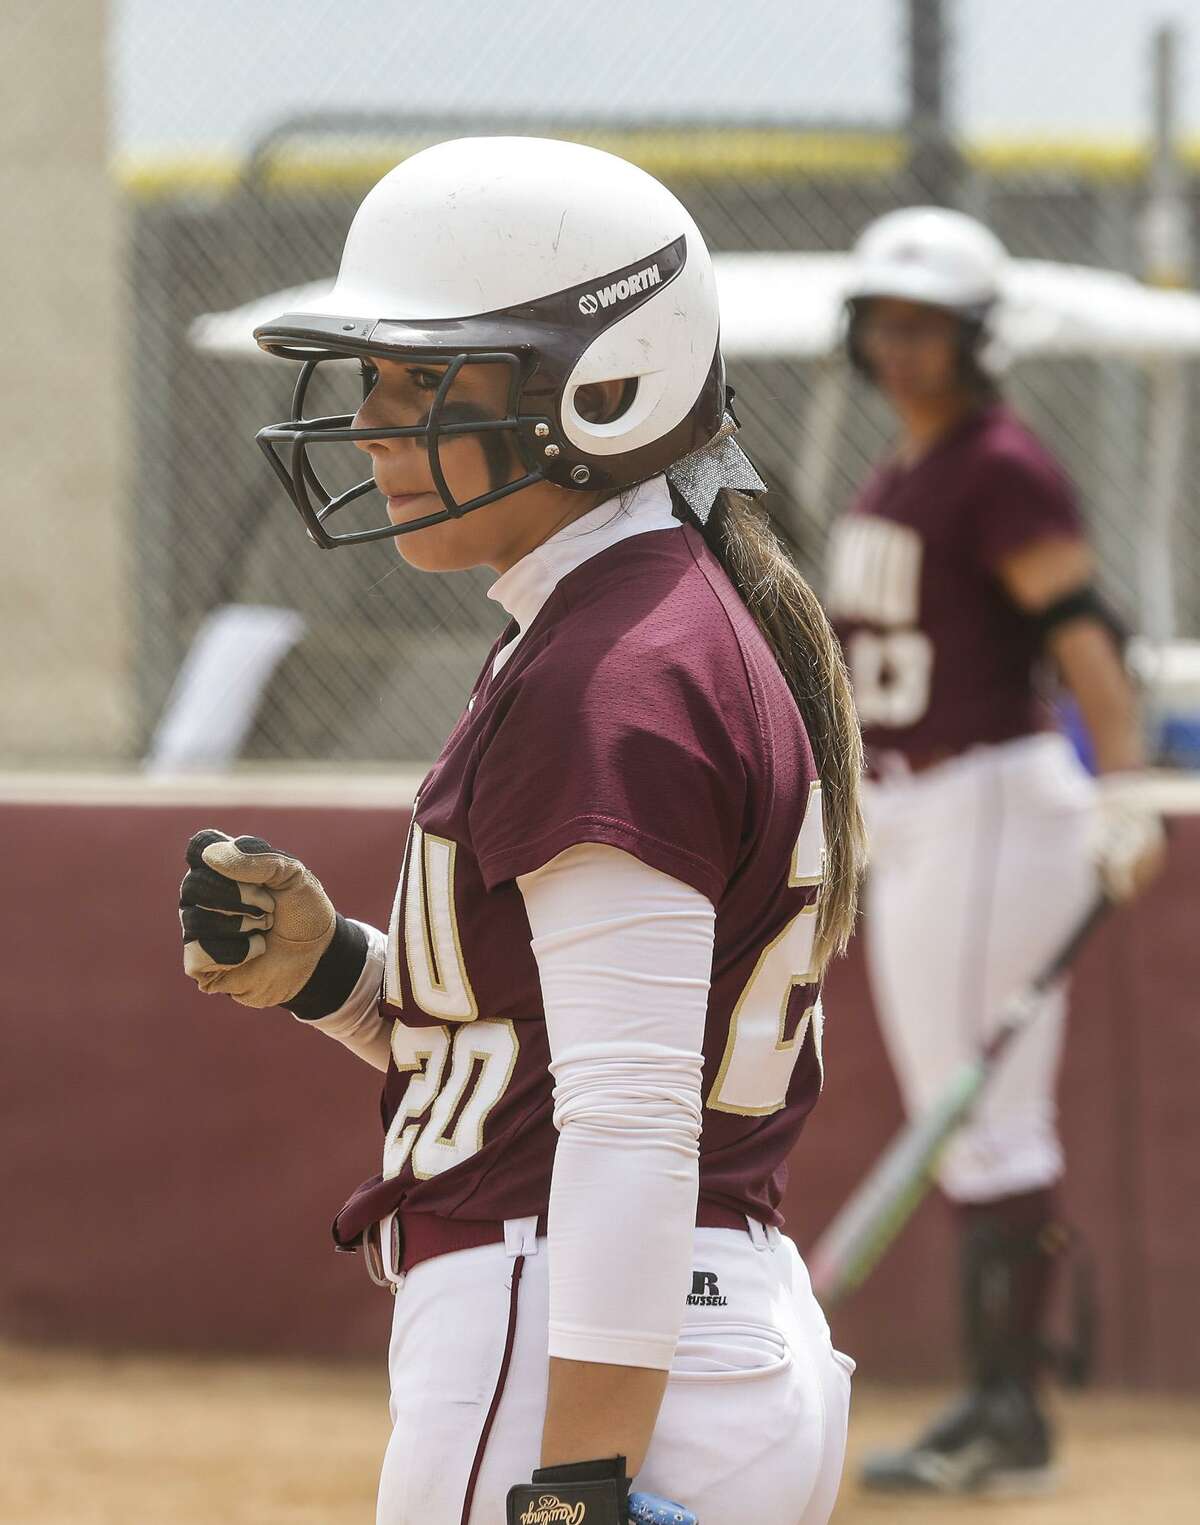 Erika Sanchez finished second on the Dustdevils in batting average (.246), doubles (5) and RBIs (19) in 2017. TAMIU is coming off its ninth straight Heartland Conference Tournament berth, all under head coach Scott Libby.